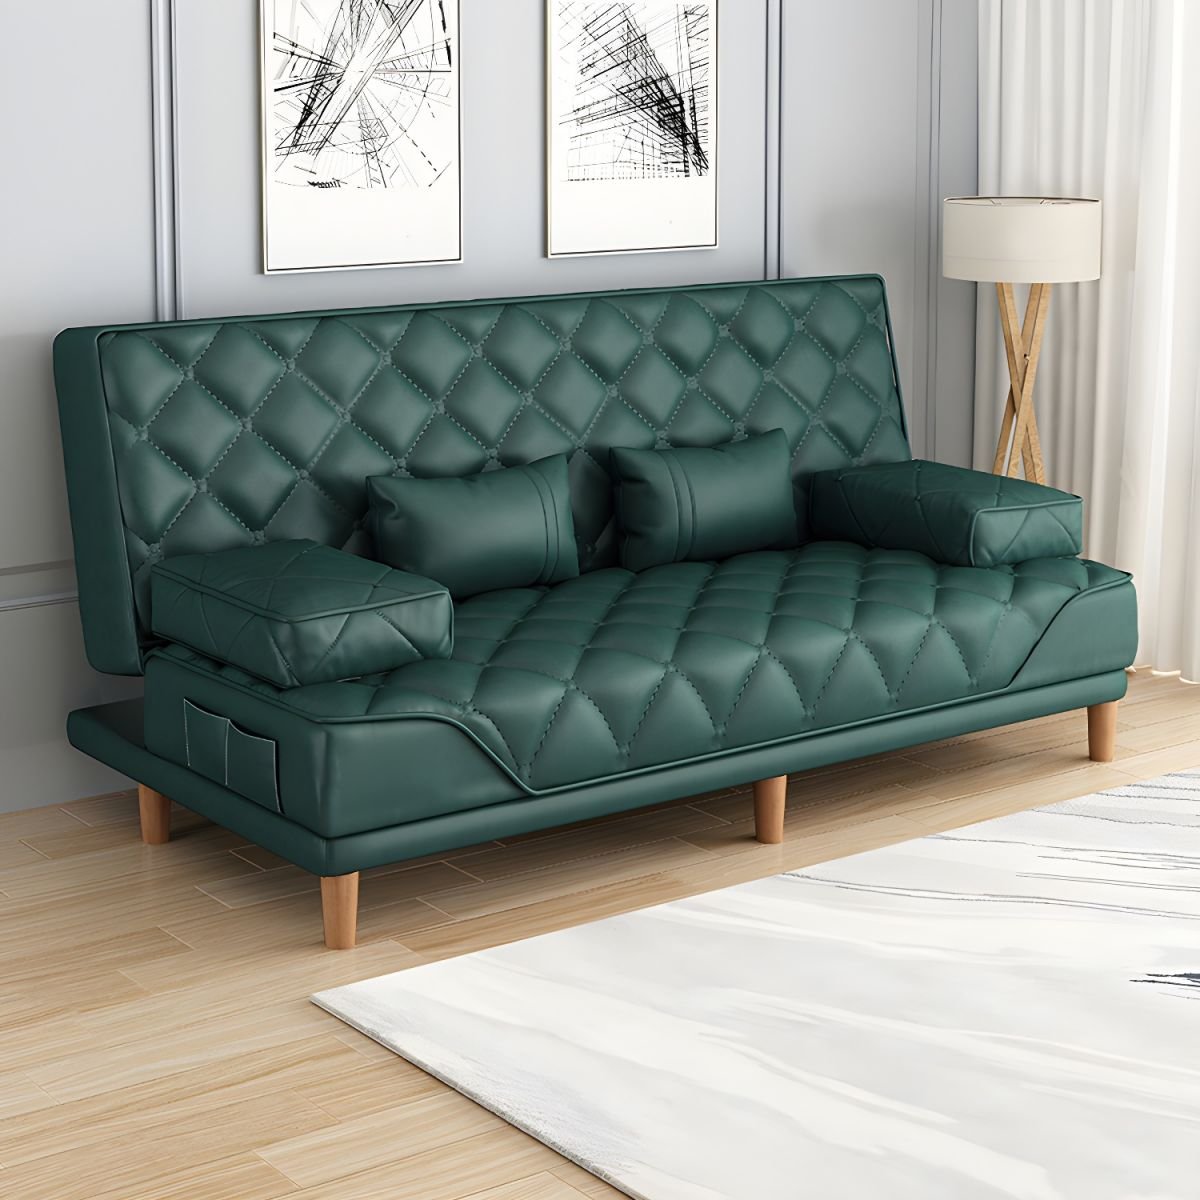 Contemporary Tight Back Convertible Sofa and Chaise with Pillow Top Arm - 47"L x 30"W x 34"H Blackish Green Tech Cloth